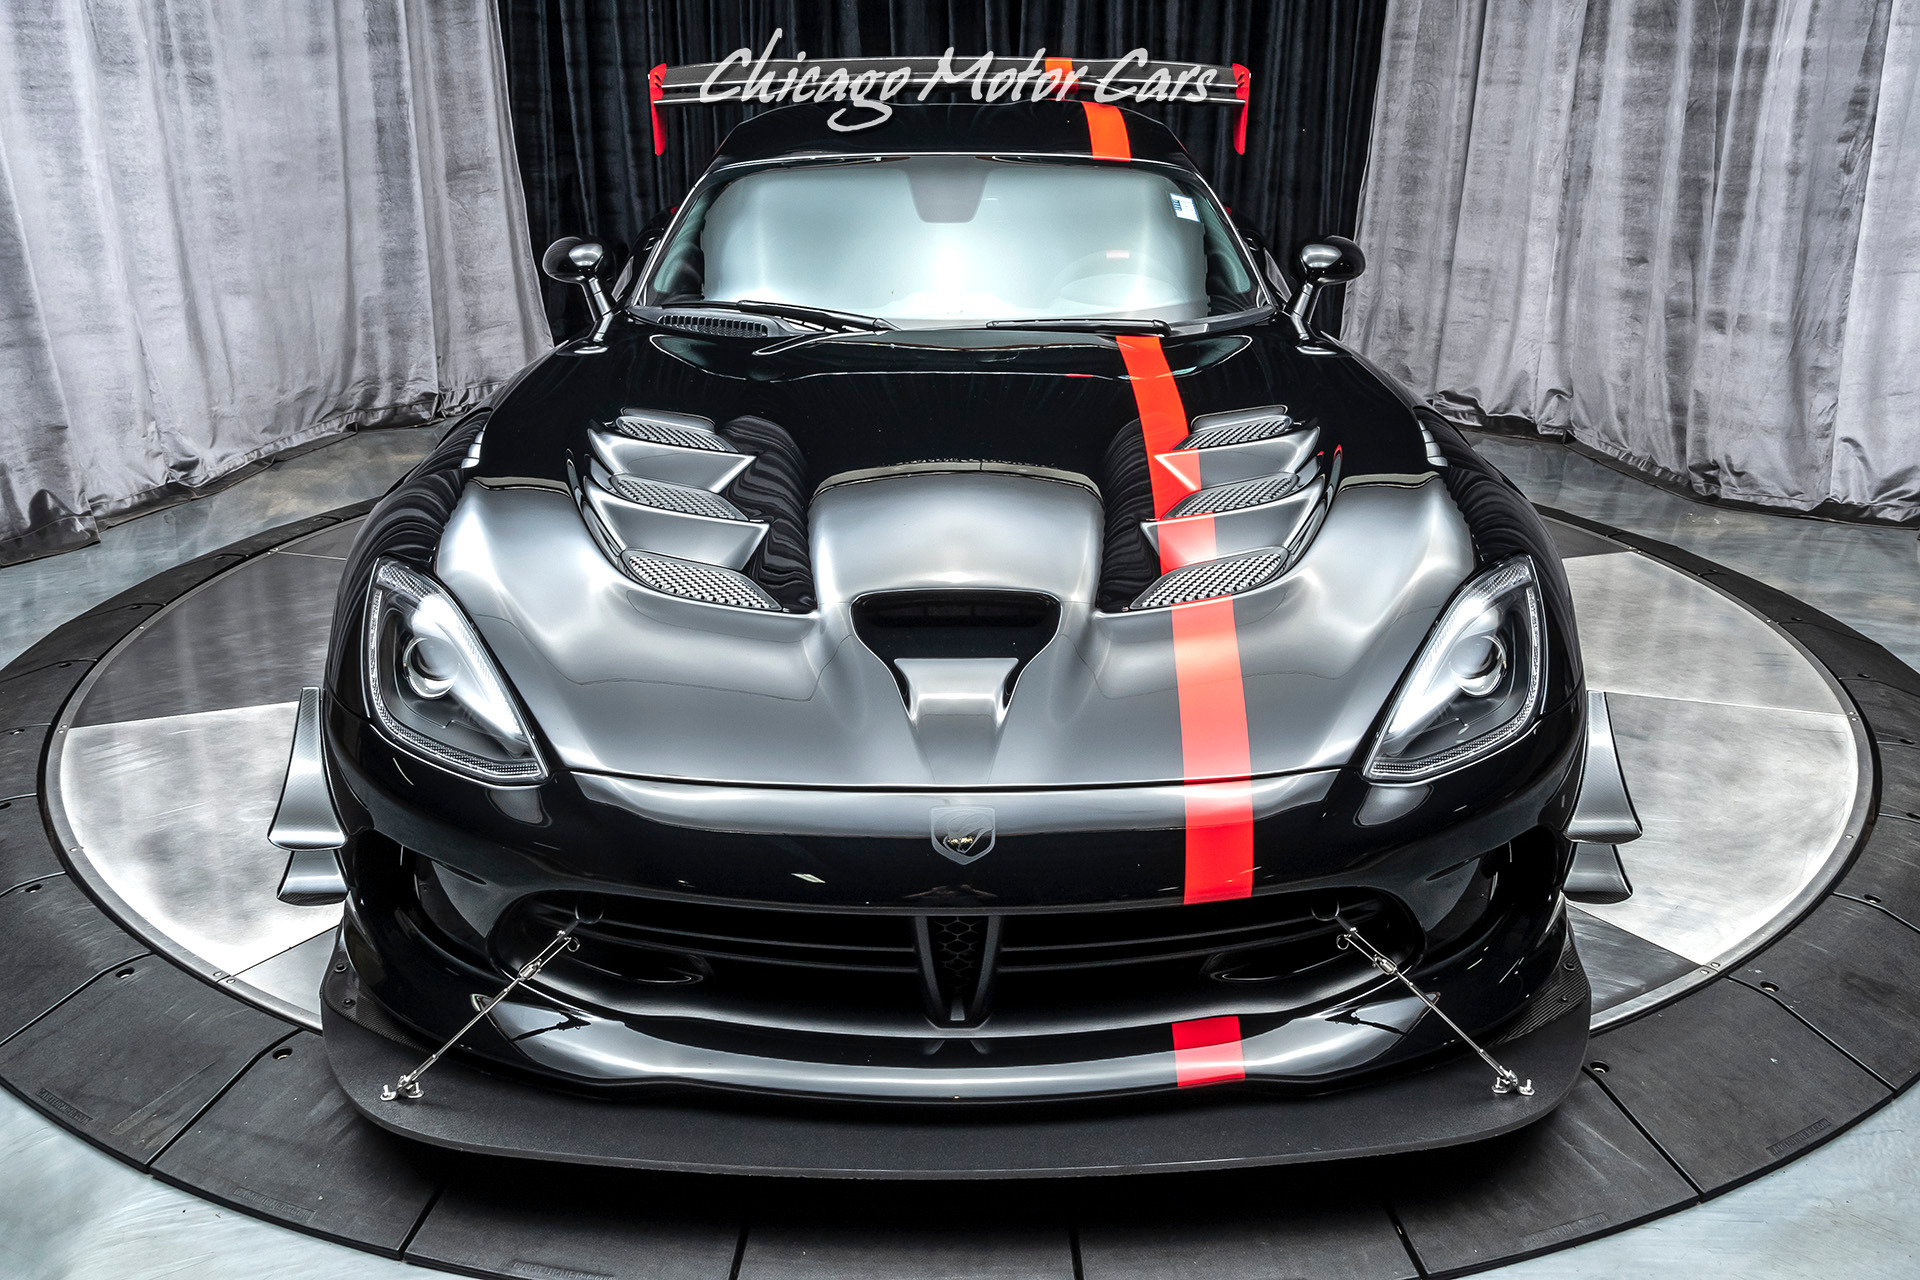 Used-2016-Dodge-Viper-Viper-ACR-Coupe-EXTREME-AERO-PACKAGE